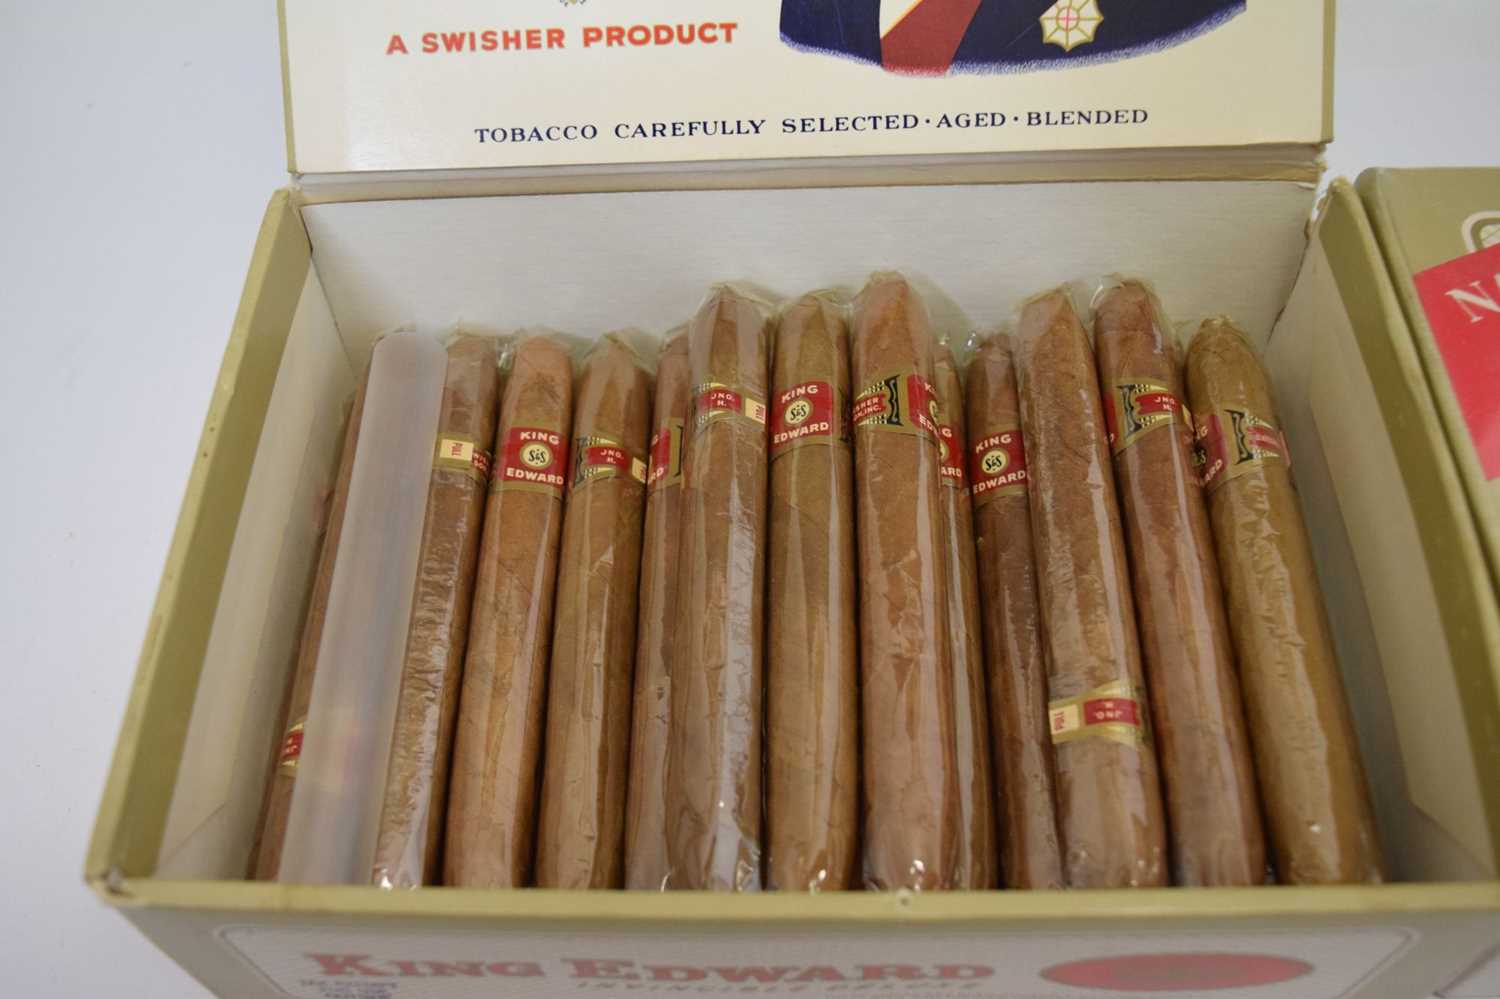 King Edward Invincible DeLuxe Cigars - Image 3 of 5